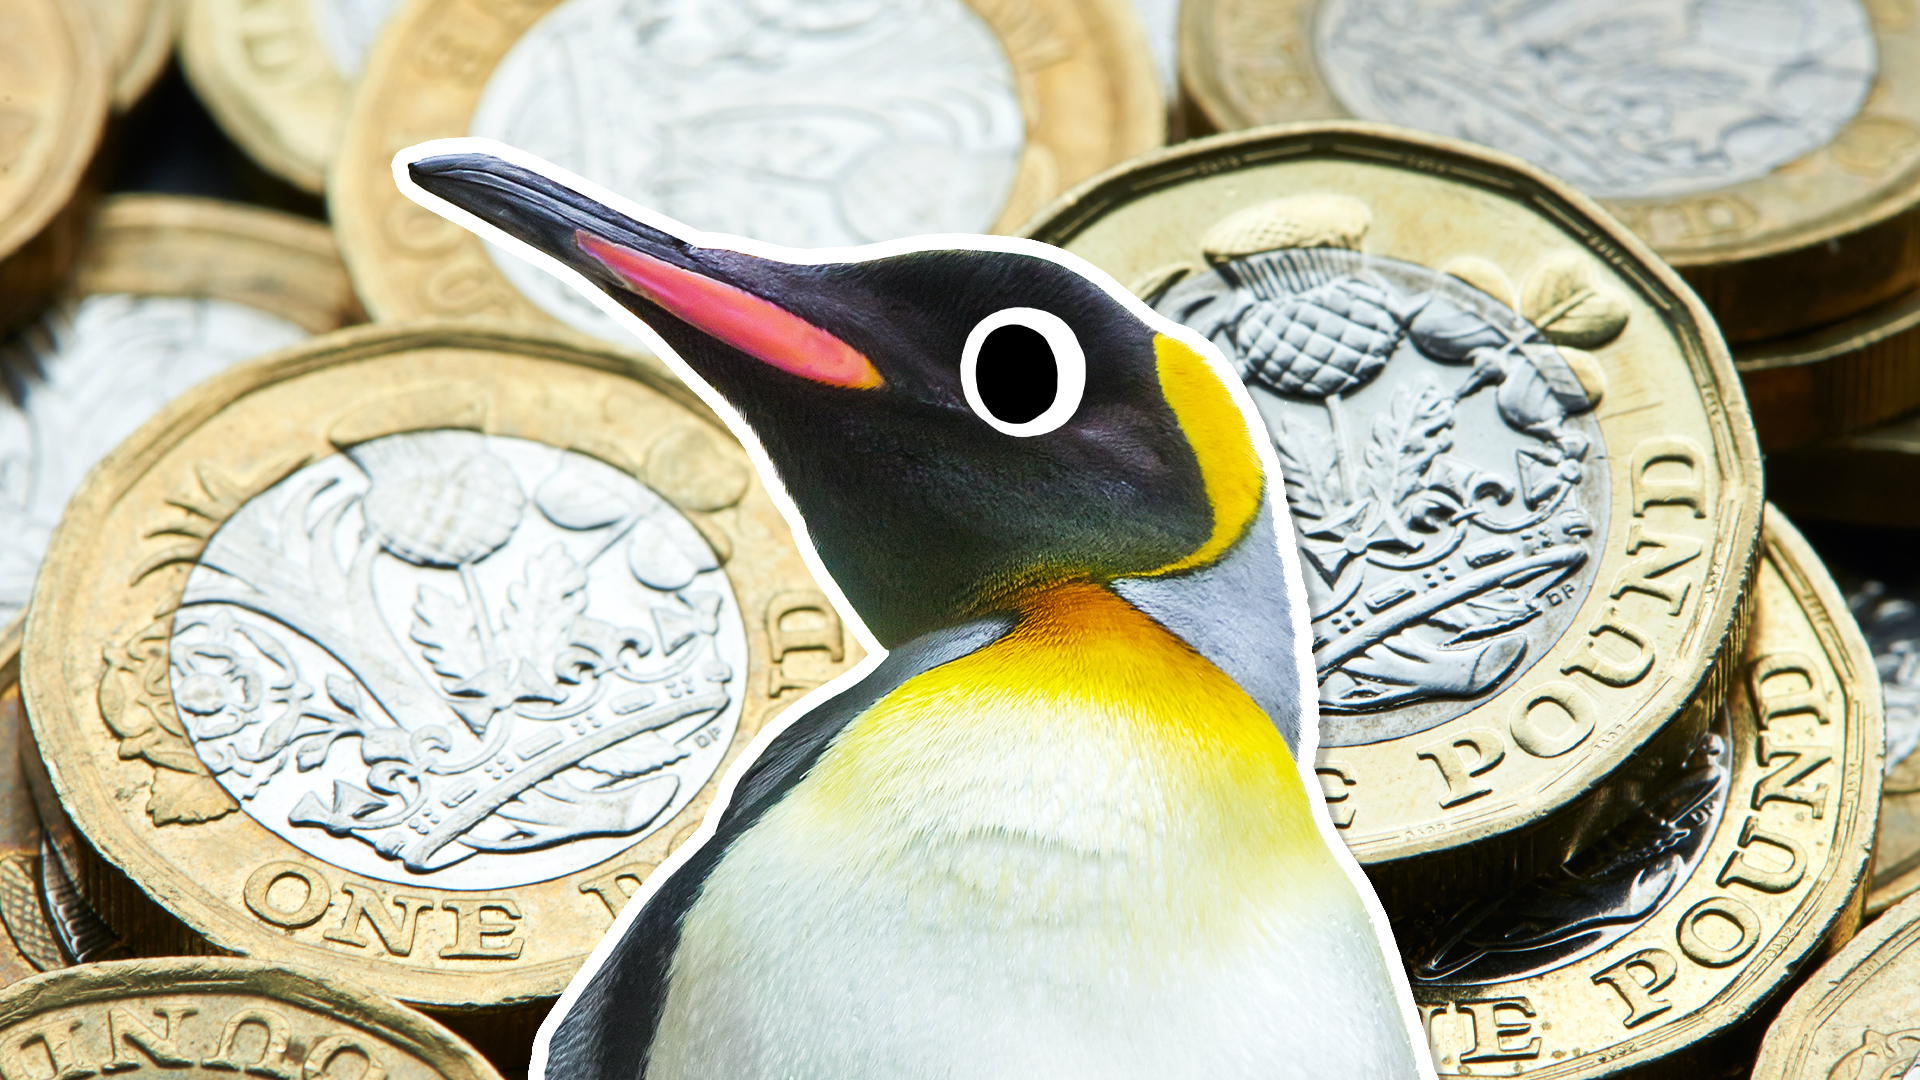 Penguin and coins